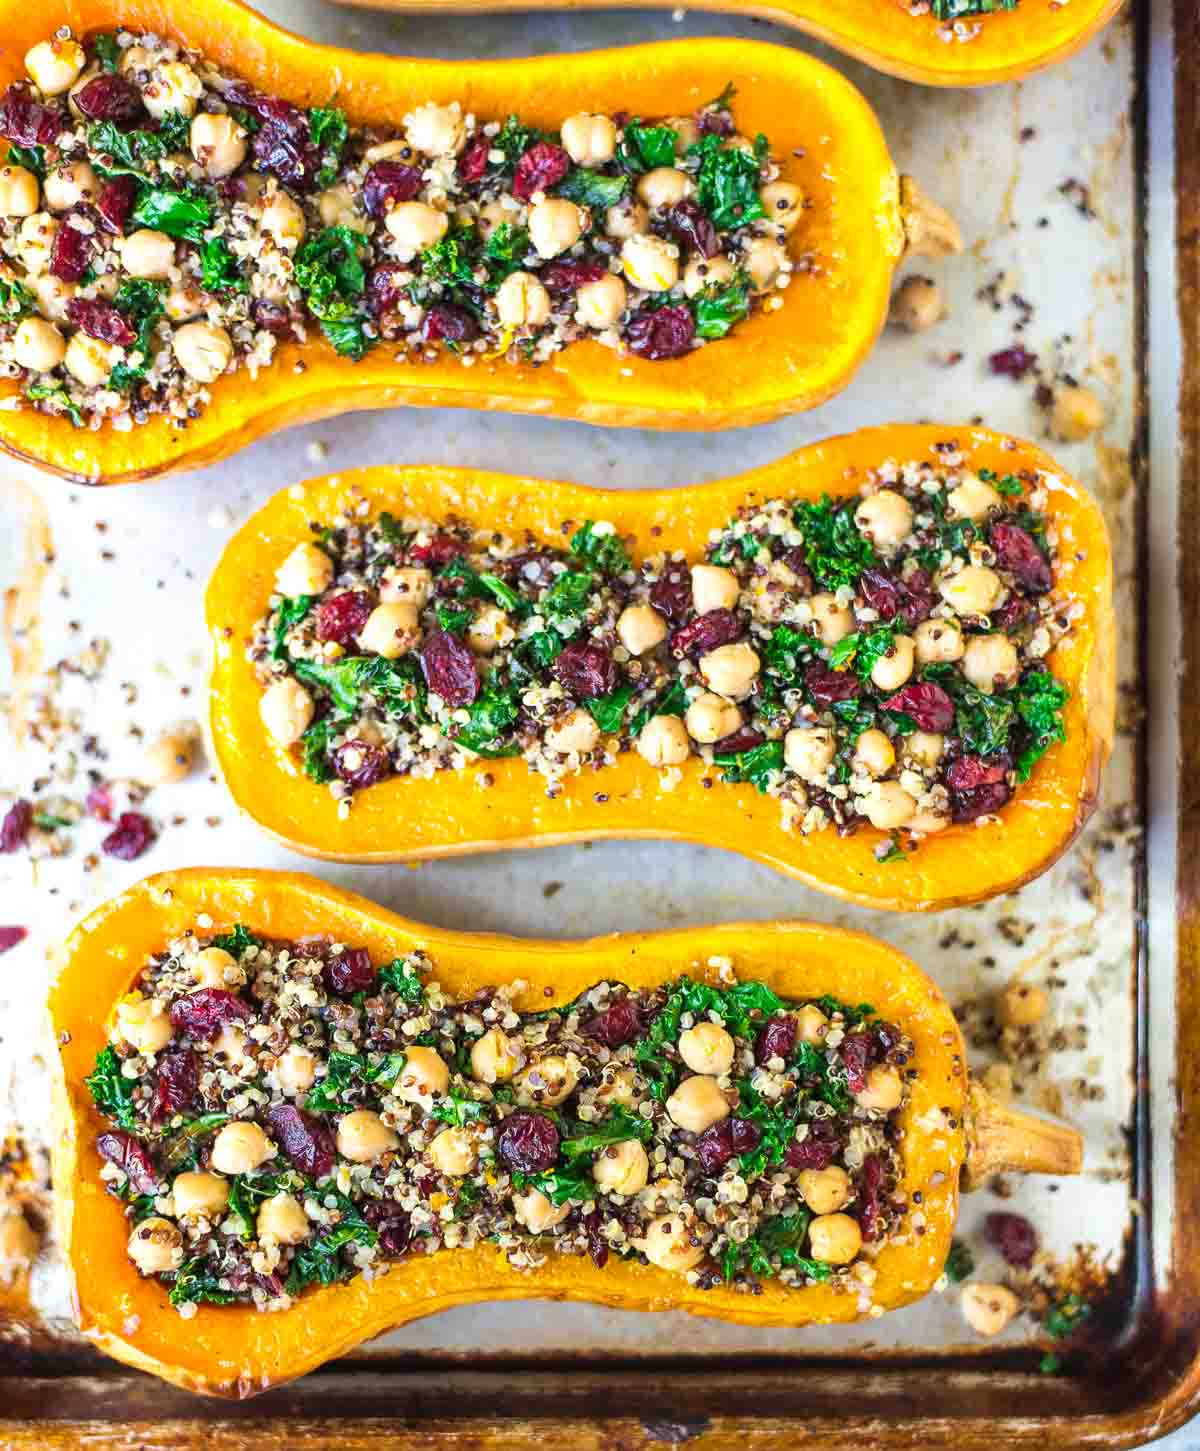 Healthy Butternut Squash Recipes
 Quinoa Stuffed Butternut Squash with Cranberries and Kale